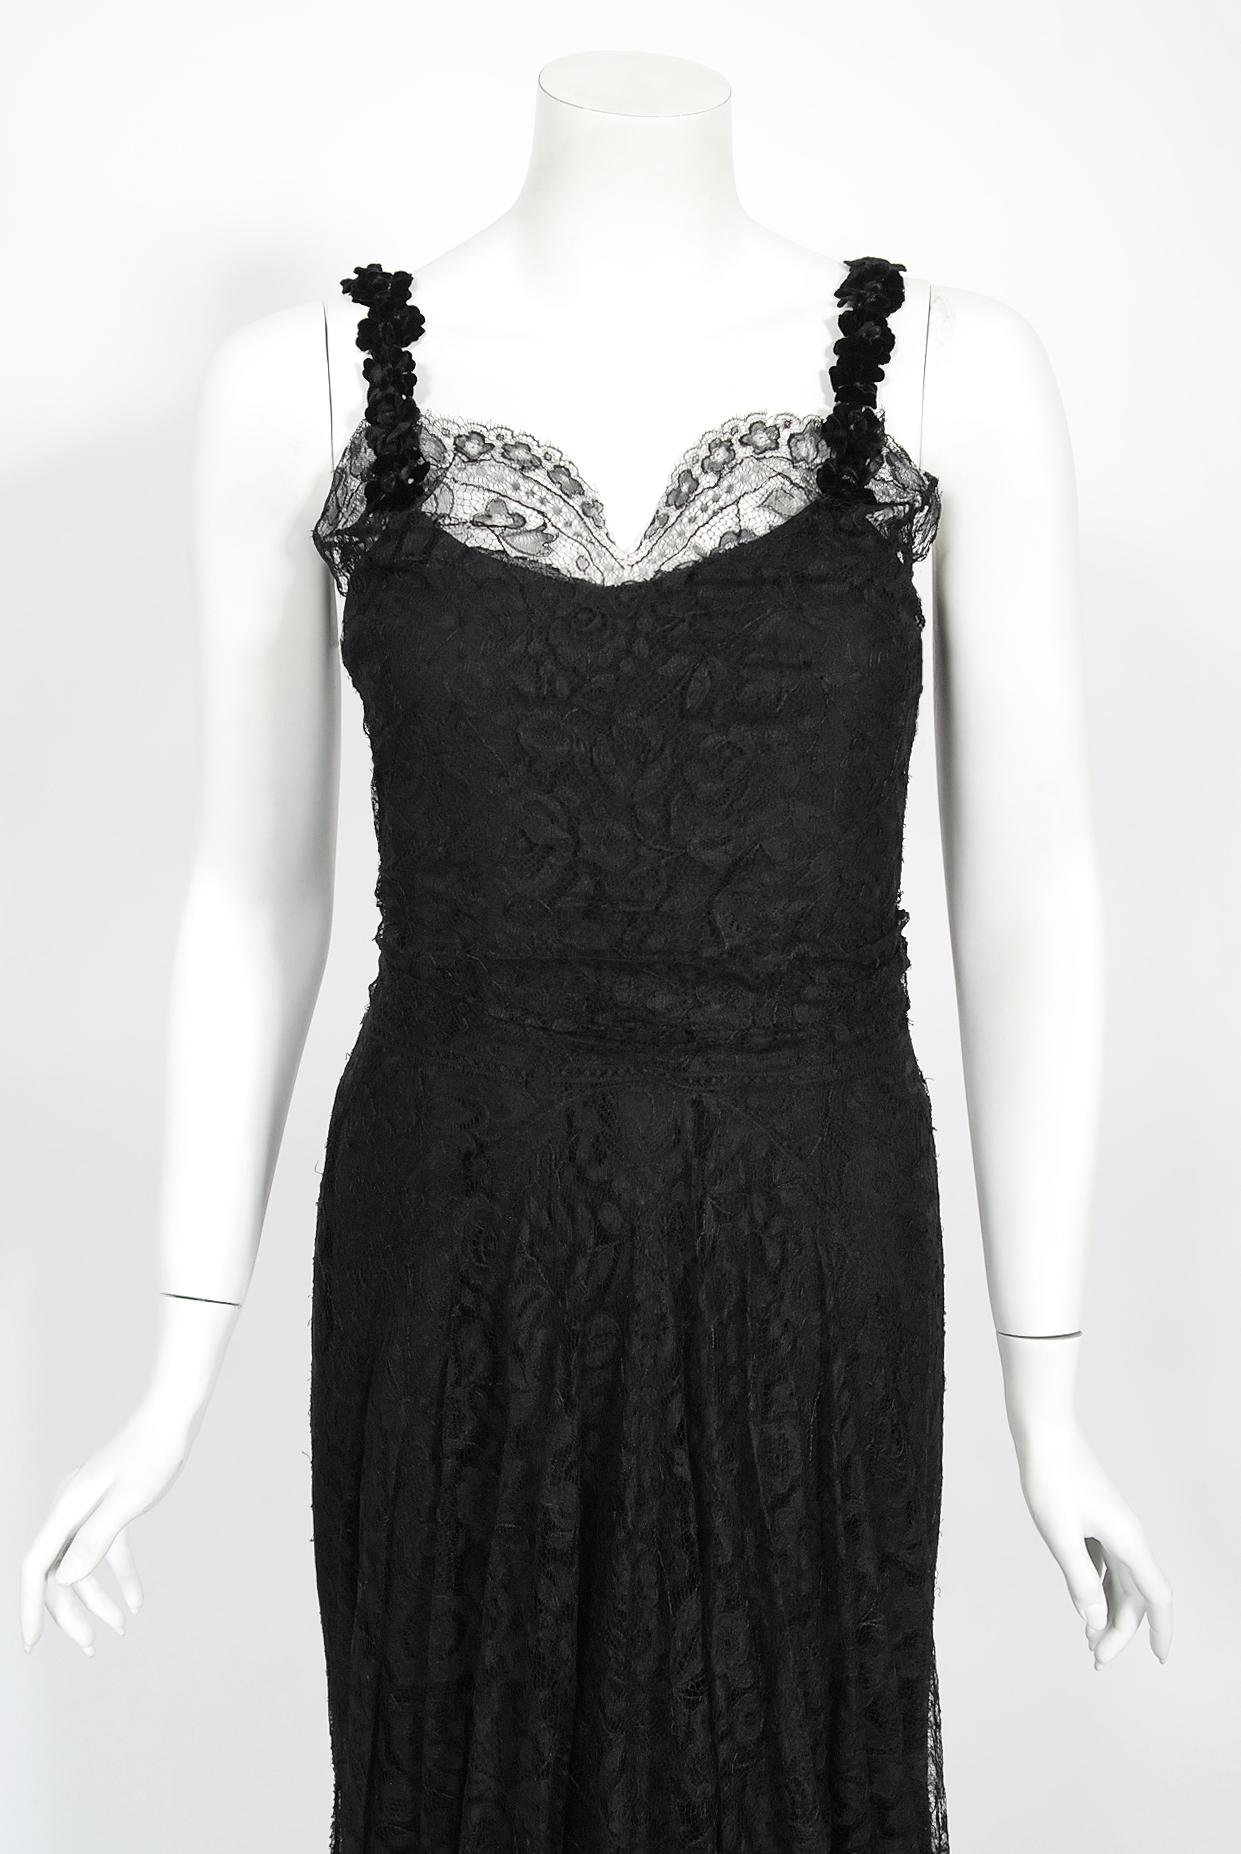 A magnificent Bonwit Teller & Co couture black lace bias-cut gown from the 1930's 'Old Hollywood' era of glamour. The fabric itself is a masterpiece; French floral motif black scalloped lace that has been draped to perfection. We added many pictures